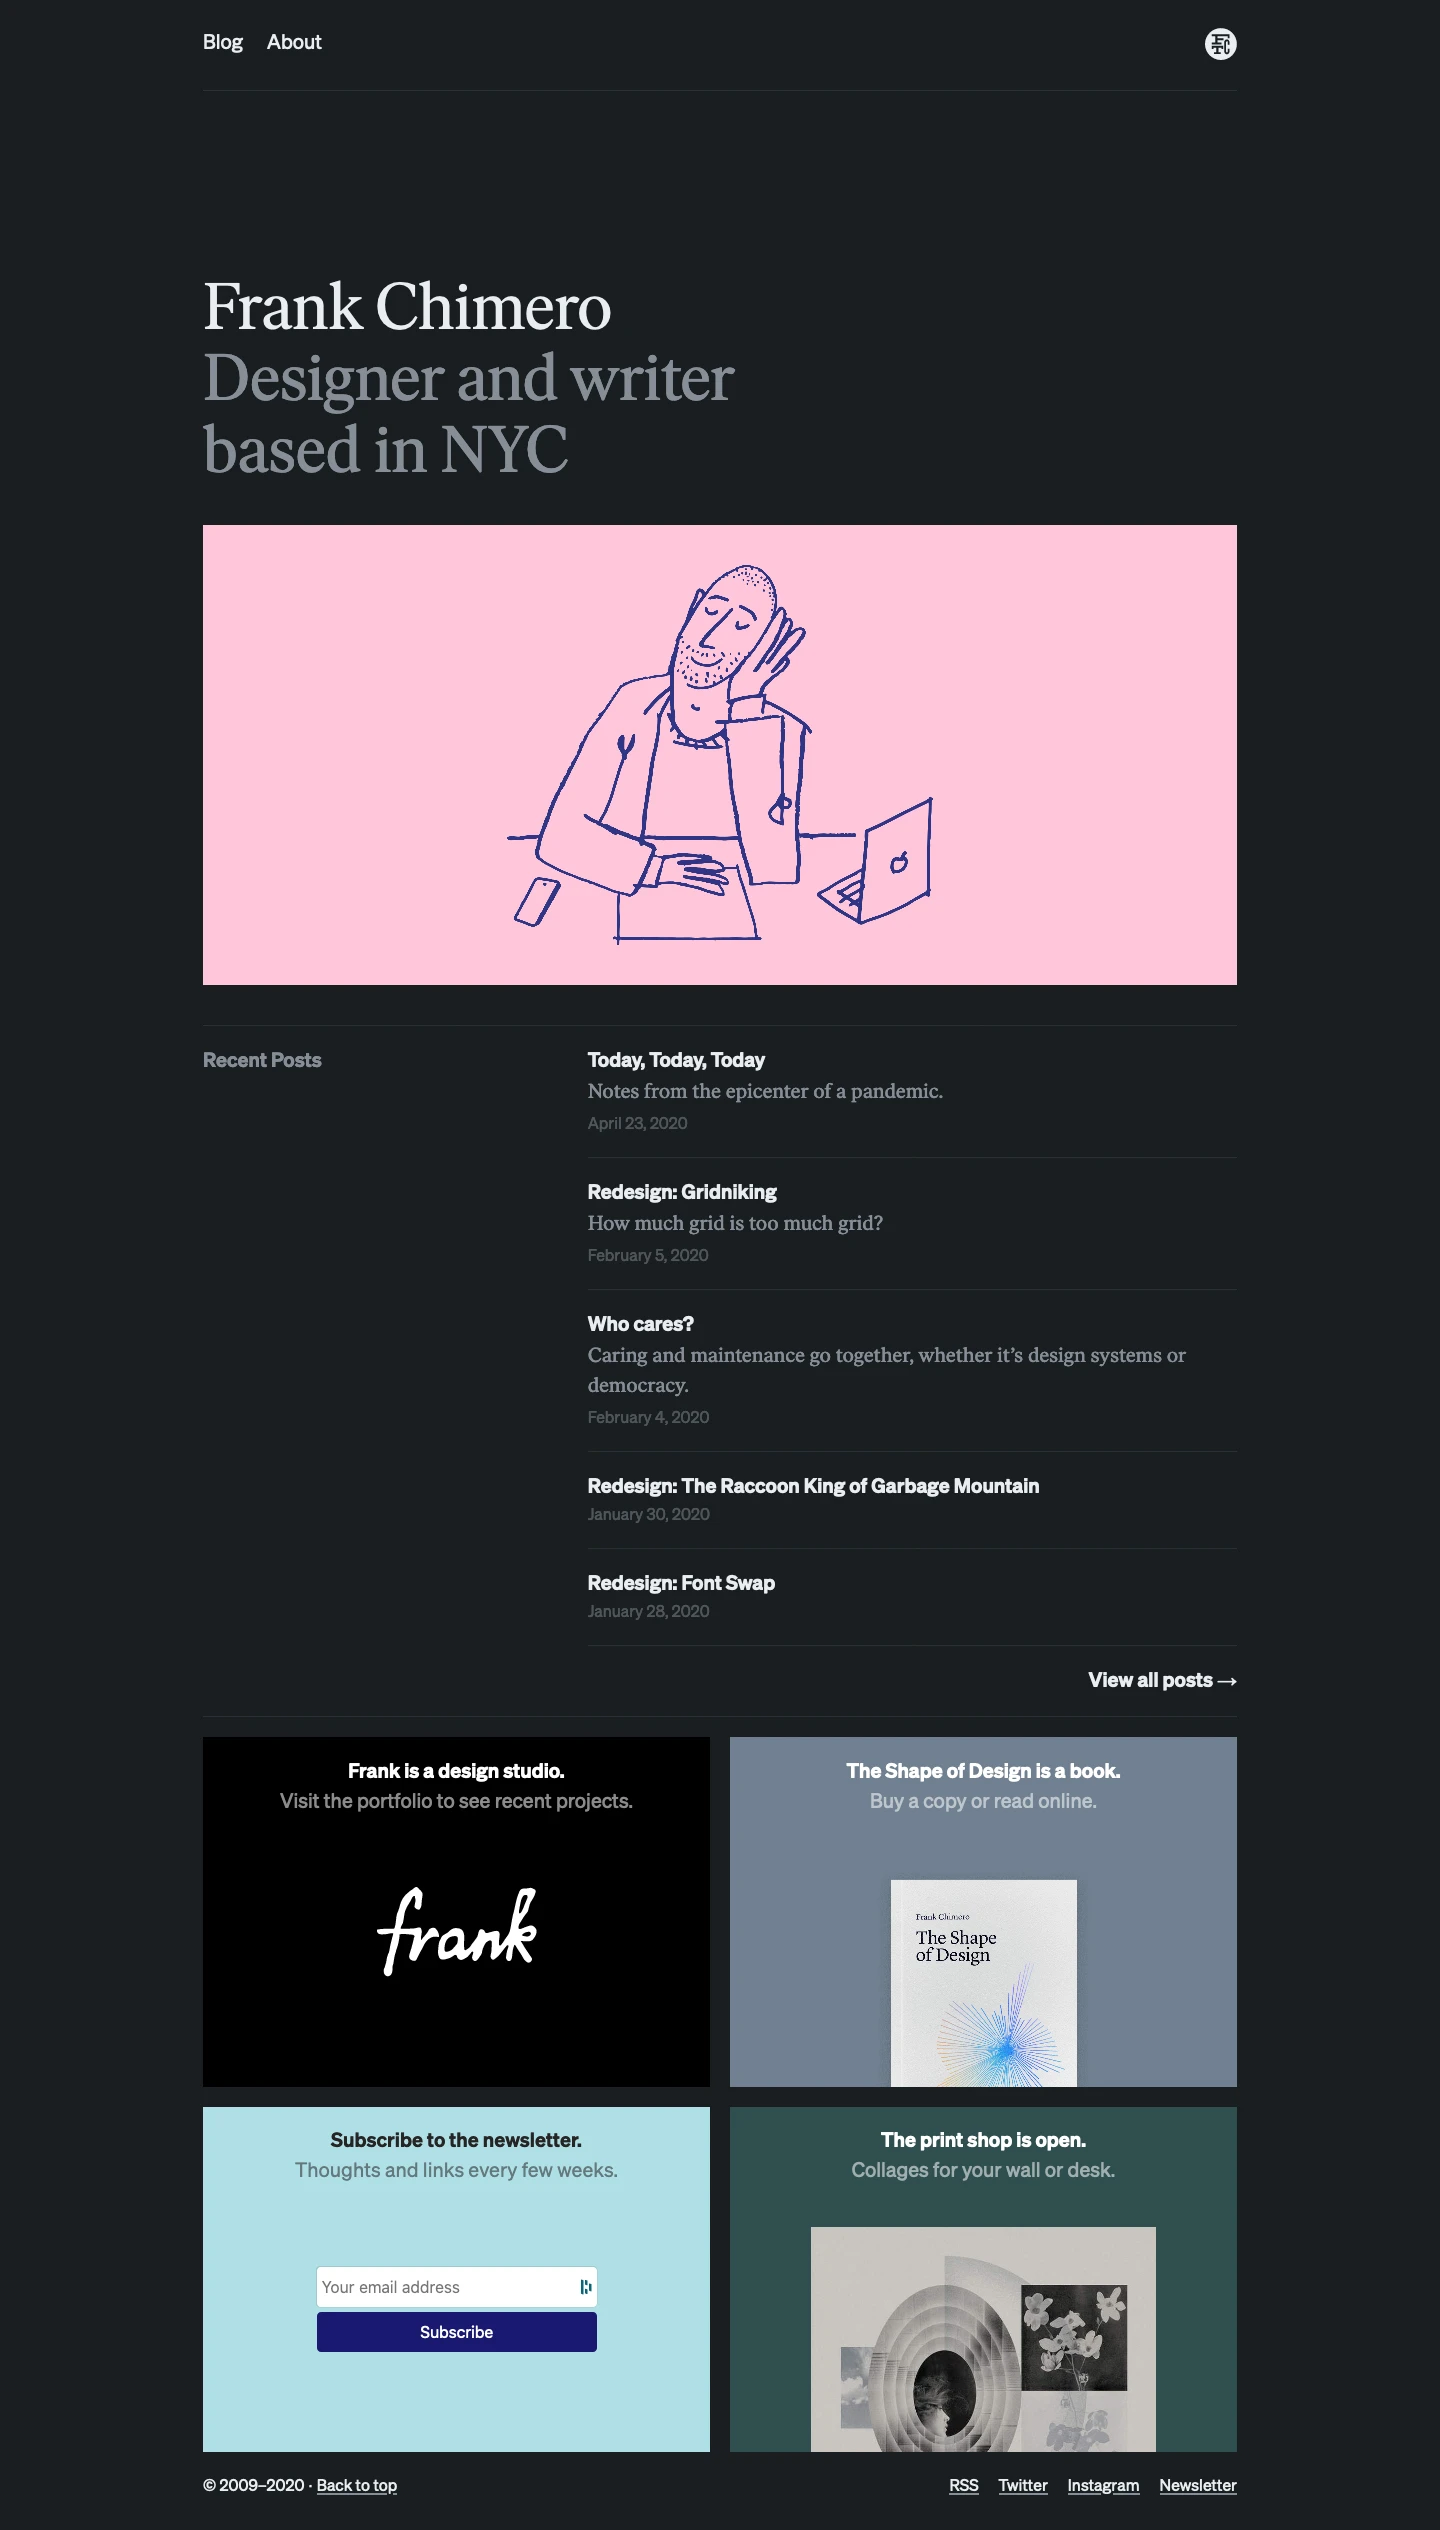 Frank Chimero Landing Page Example: I’m a designer and writer with a love for pizza, museums, playlists, natural wine, and Phil Collins. For the past 15 years, I’ve worked as a designer making brands, books, interfaces, and illustrations. I now do client work through my design practice, Frank.